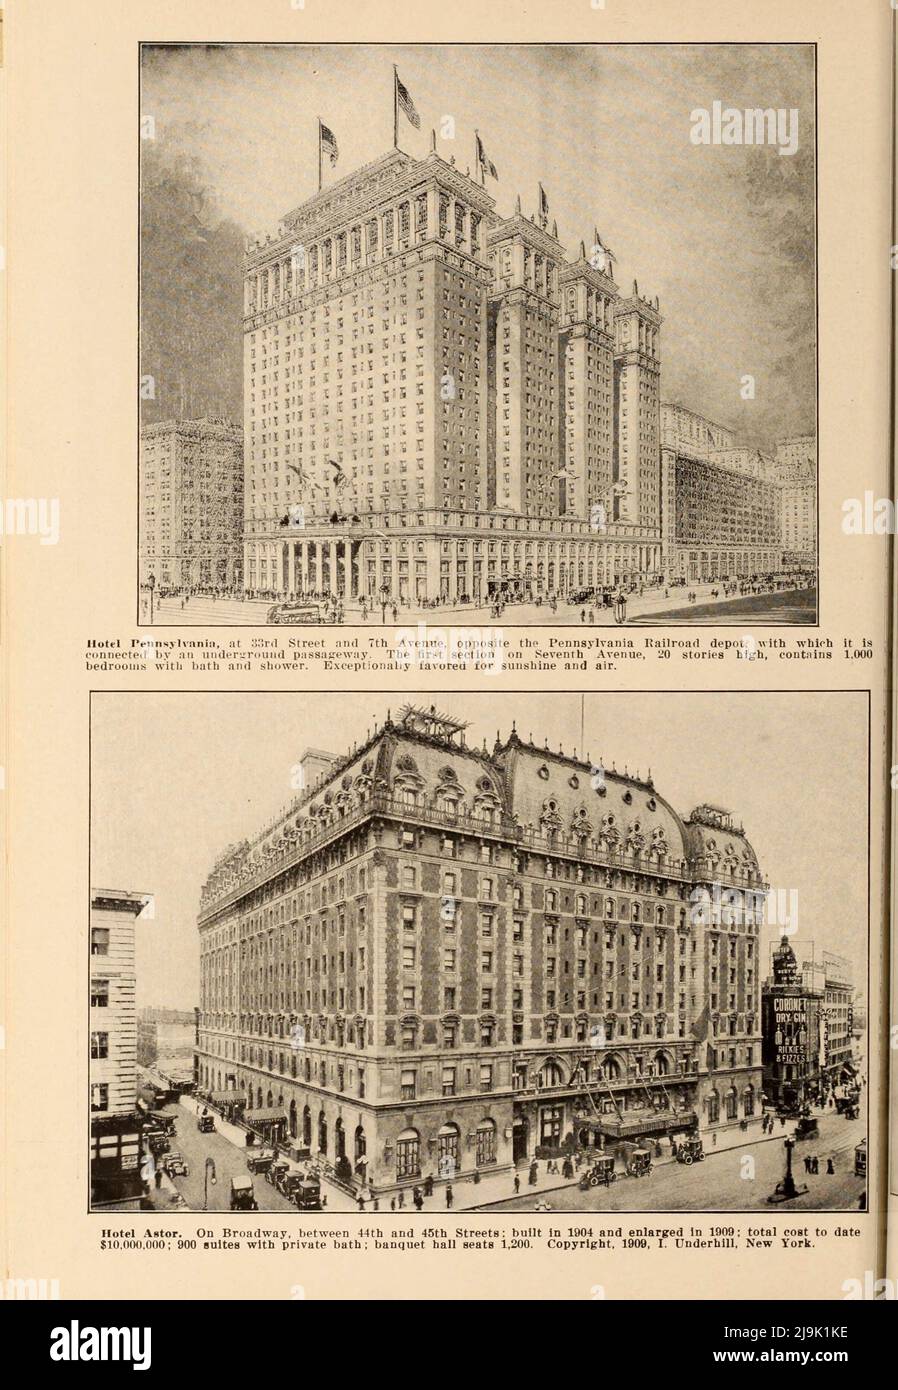 Hotel Pennsylvania on 33rd street and 7th Avenue; Hotel Astor on Broadway 1916 from the book ' New York illustrated ' Publication date 1916 Publisher New York : Success Postal Card Co. Stock Photo